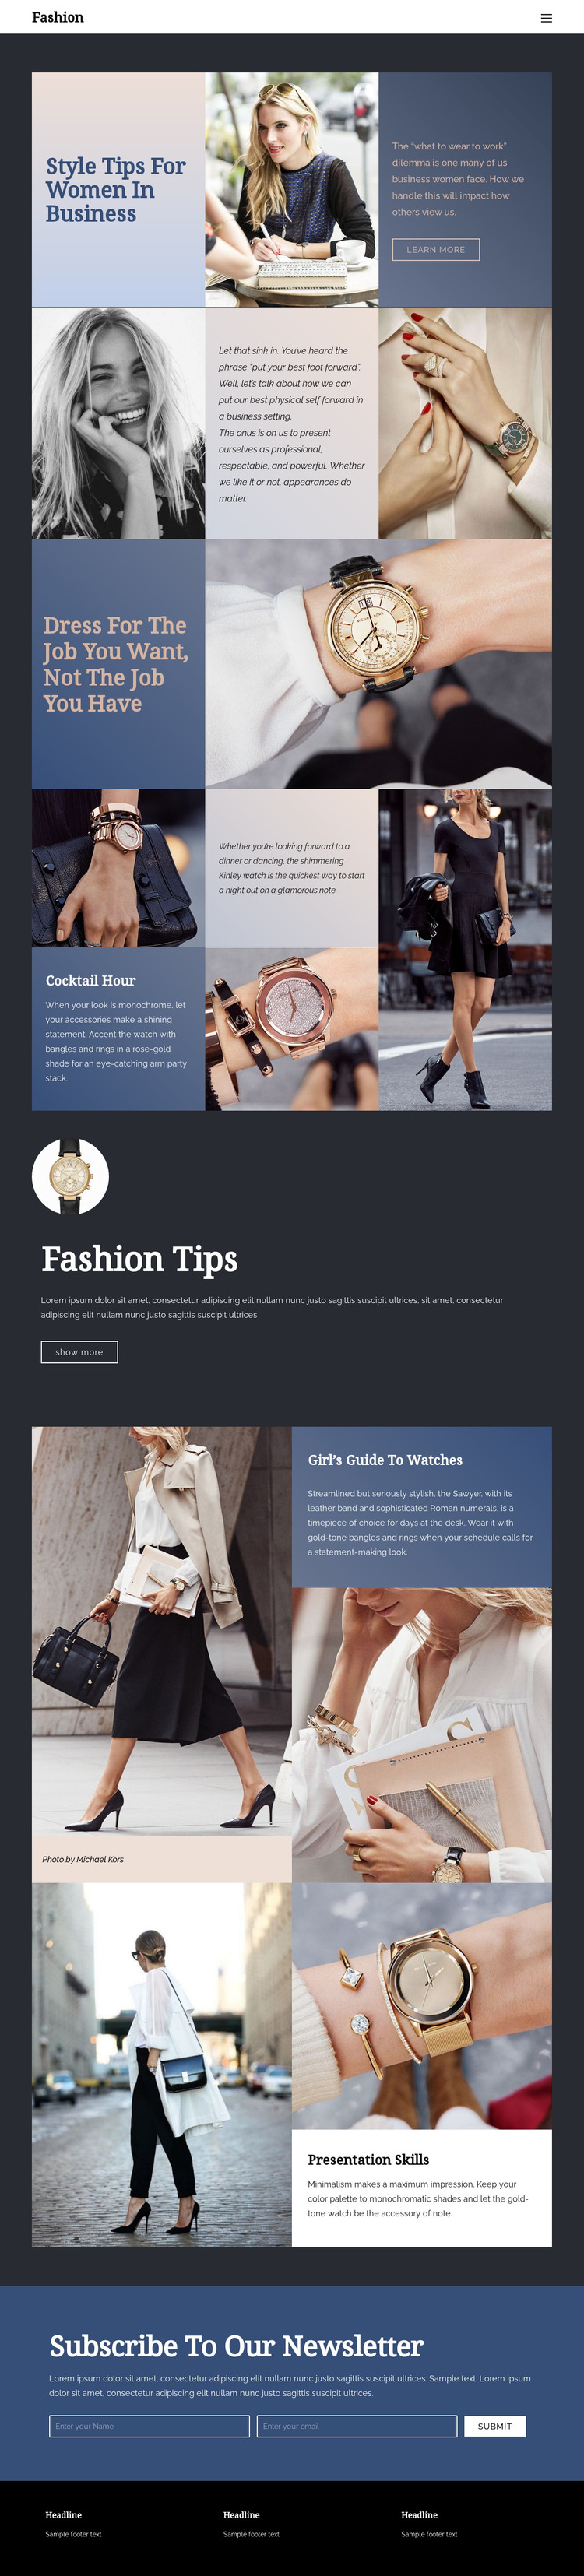 Tips to succeed in fashion Web Design